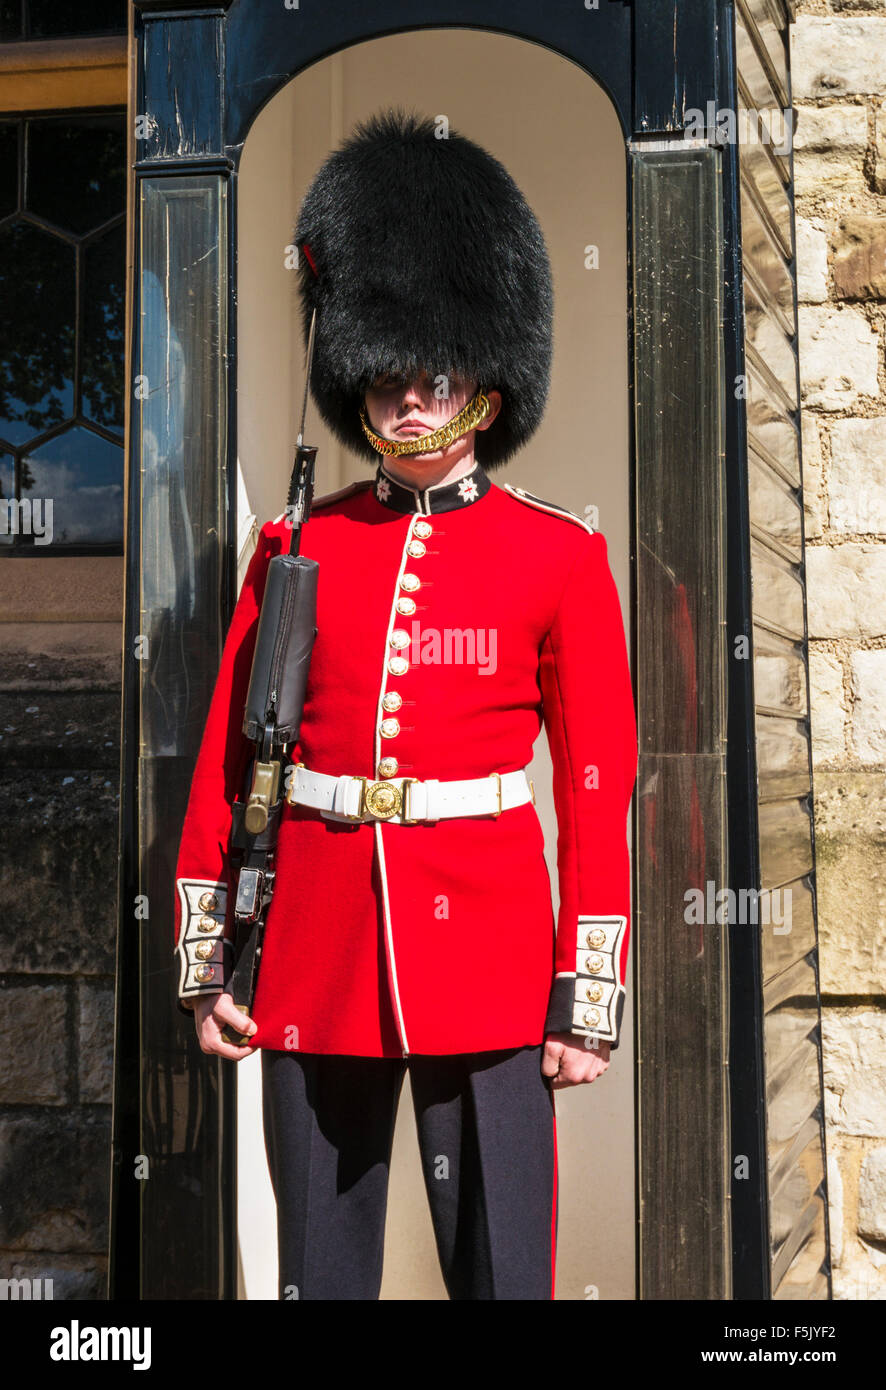 A coldstream guard guarding the Crown jewels in the Jewel house inside tower of london City of London England UK GB EU Europe Stock Photo